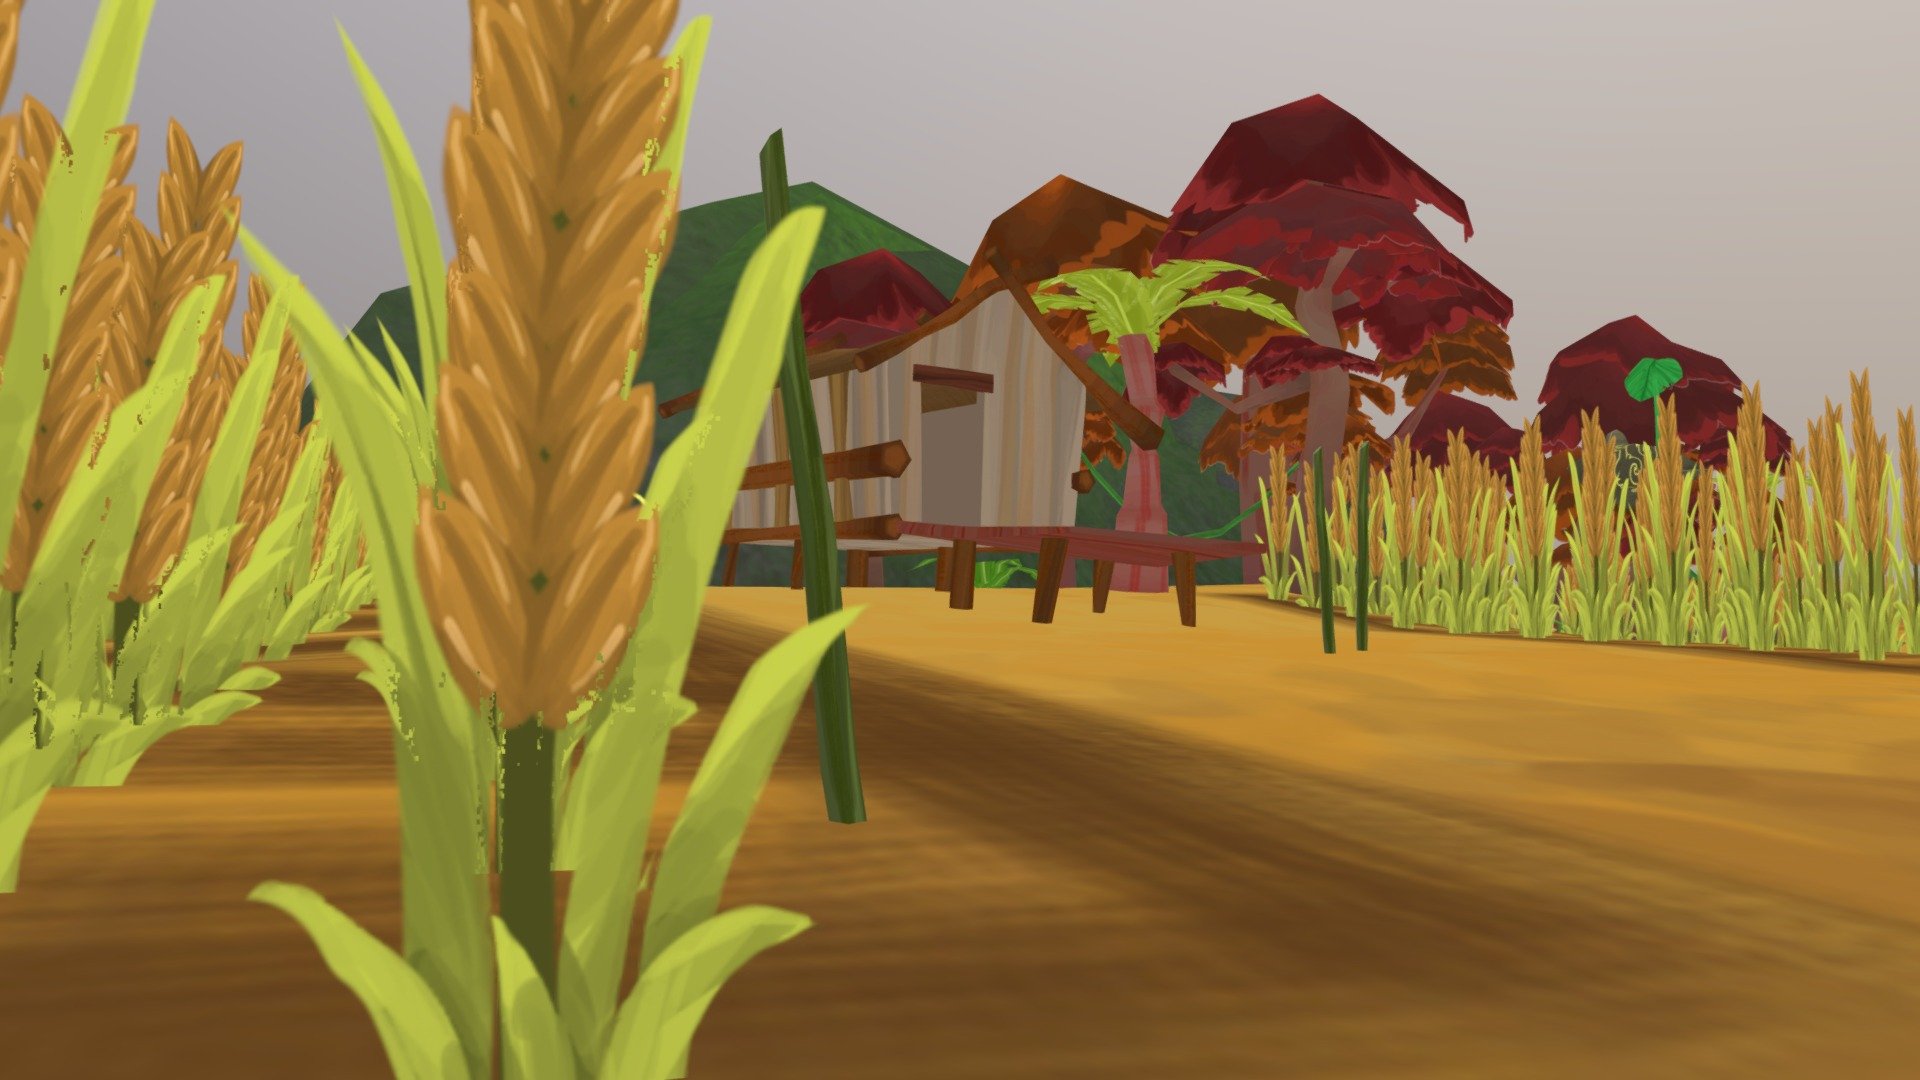 This is the level two environment in the game Manang: Awakening

Manang: Awakening is a 3D adventure mobile game. It is centred around Albert who was summoned to the spiritual realm of Sebayan. Avoid evil spirits using Albert’s new-found powers, help him navigate and escape the mysterious realm.

Lead 3D artist: Aung Yi-Aun 

Trees &amp; plants modelled by: Lim Zhe Hao

Texture artist: Cindy Yap - Paddy farm - Manang: Awakening - 3D model by Promptus 3d model